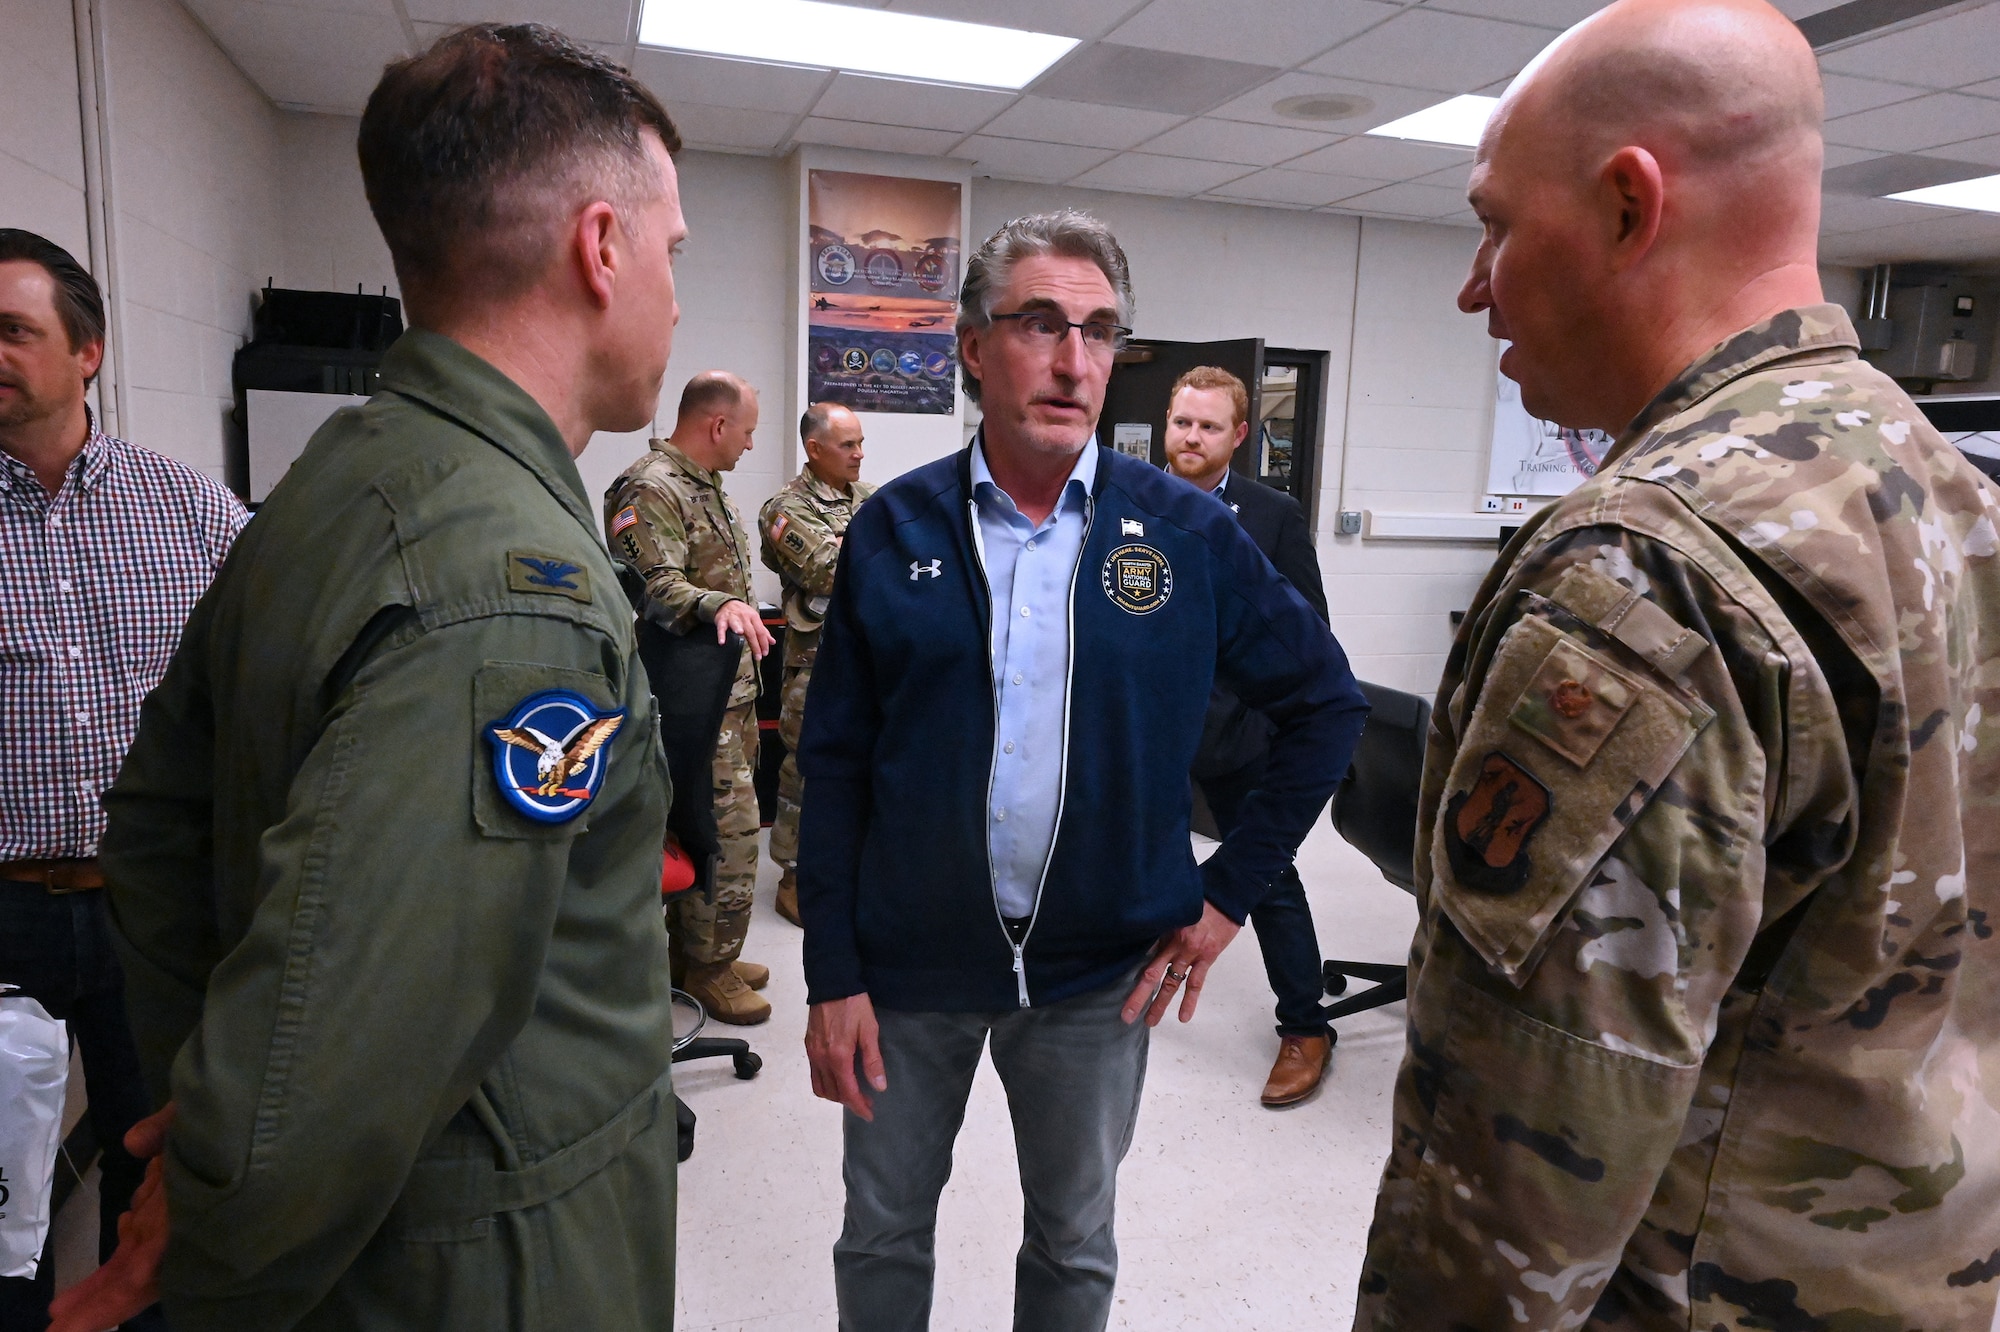 North Dakota Governor Doug Burgum stands among North Dakota Air National Guard members in military uniforms as he visits with them about state and unit issues Sept. 14, 2022.